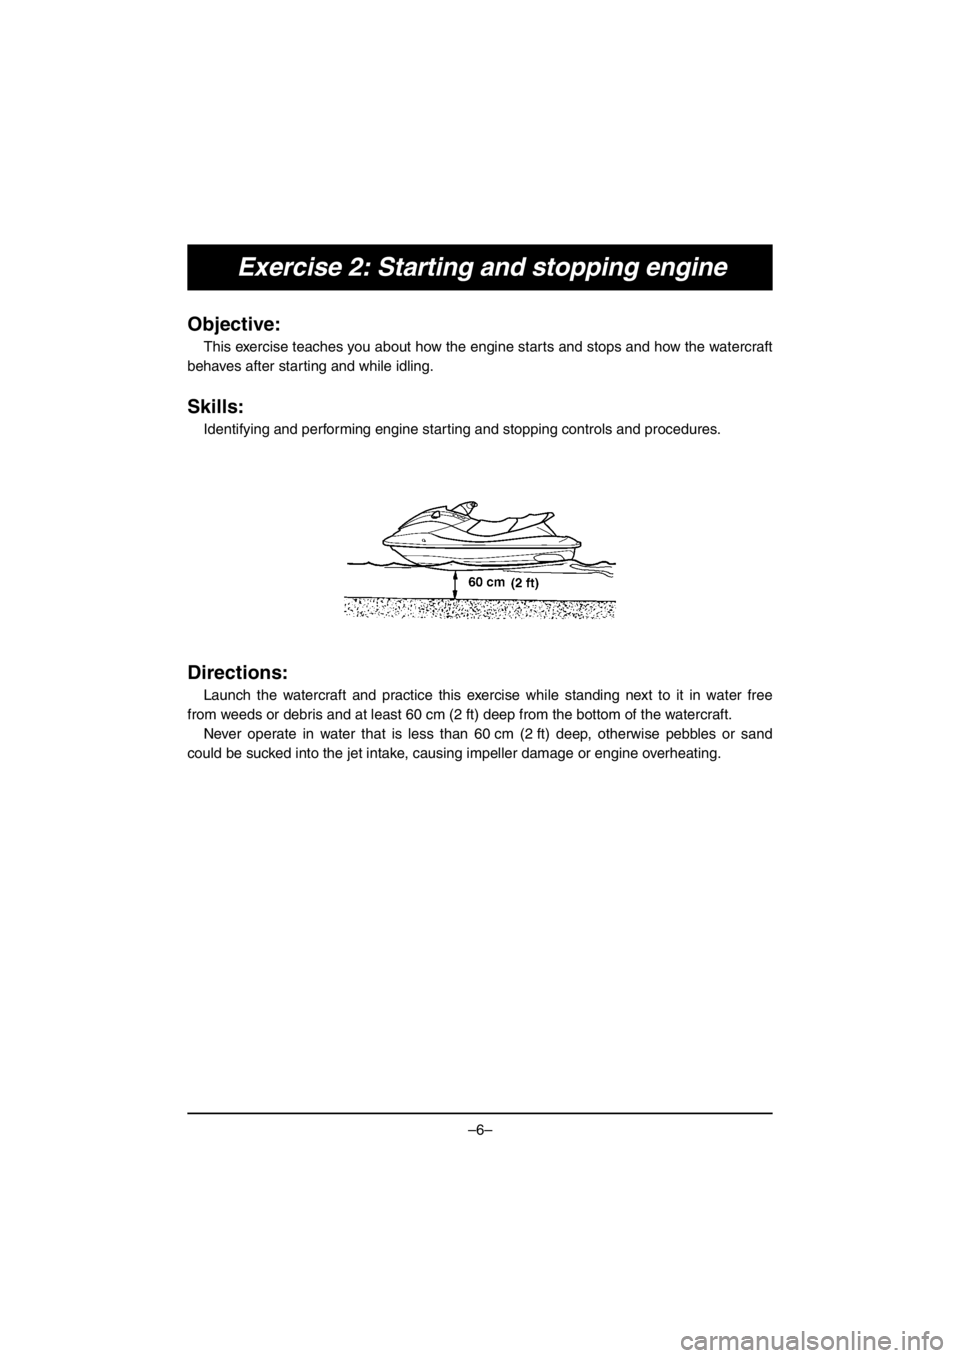 YAMAHA V1 2016  Manual de utilização (in Portuguese) –6–
Exercise 2: Starting and stopping engine
Objective:
This exercise teaches you about how the engine starts and stops and how the watercraft
behaves after starting and while idling.
Skills:
Iden